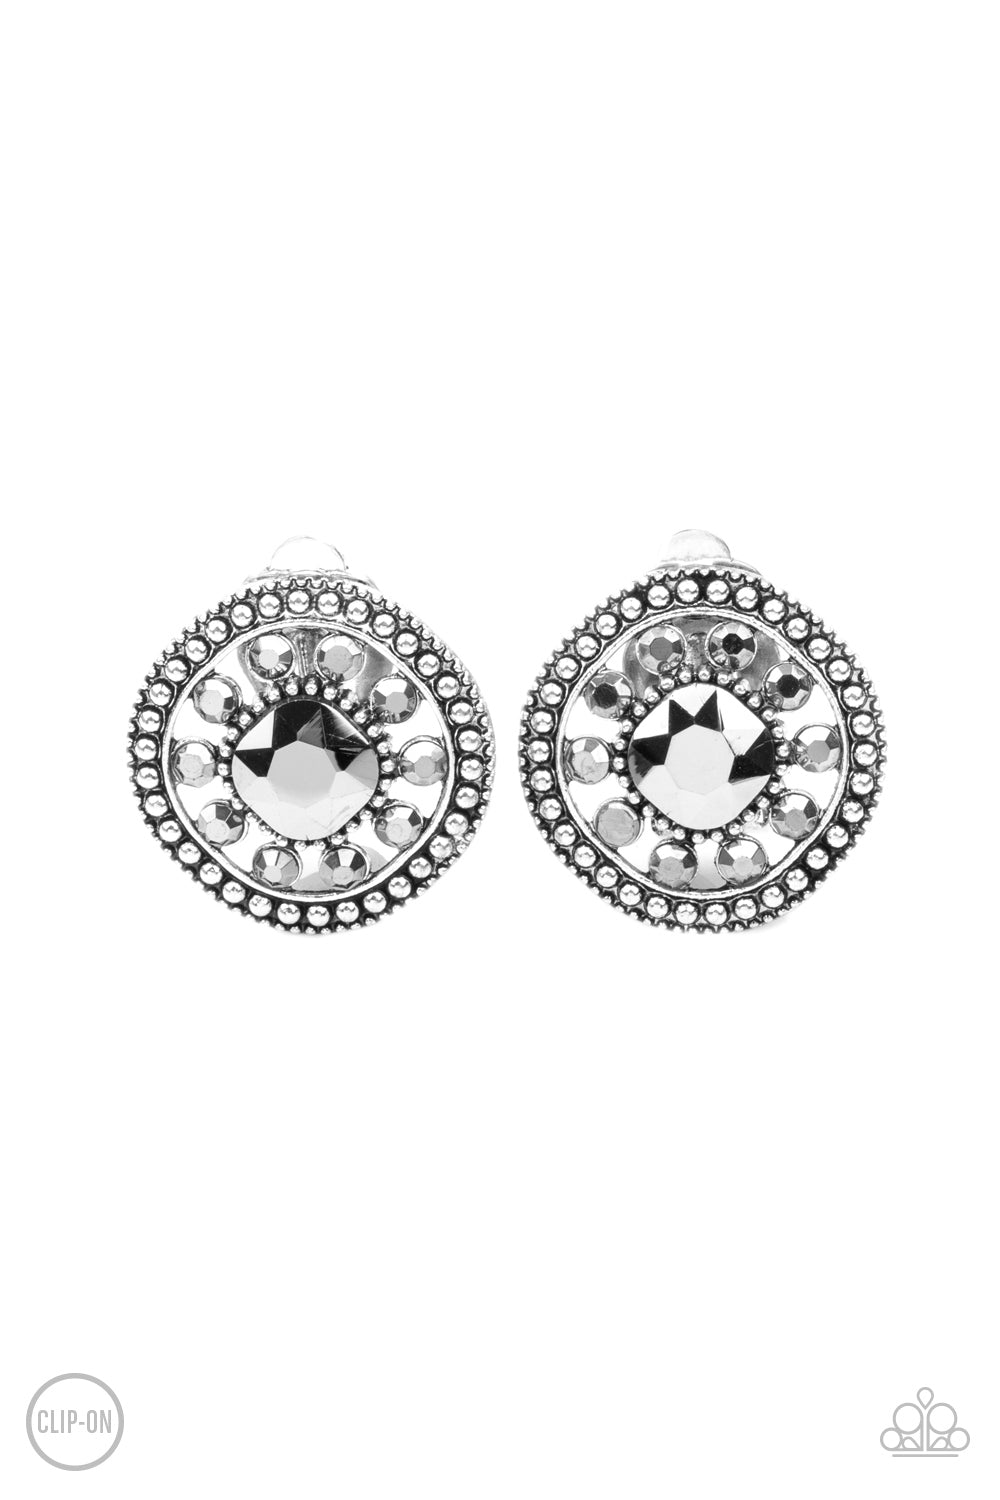 Dazzling Definition - Silver Clip-On Earrings - Princess Glam Shop